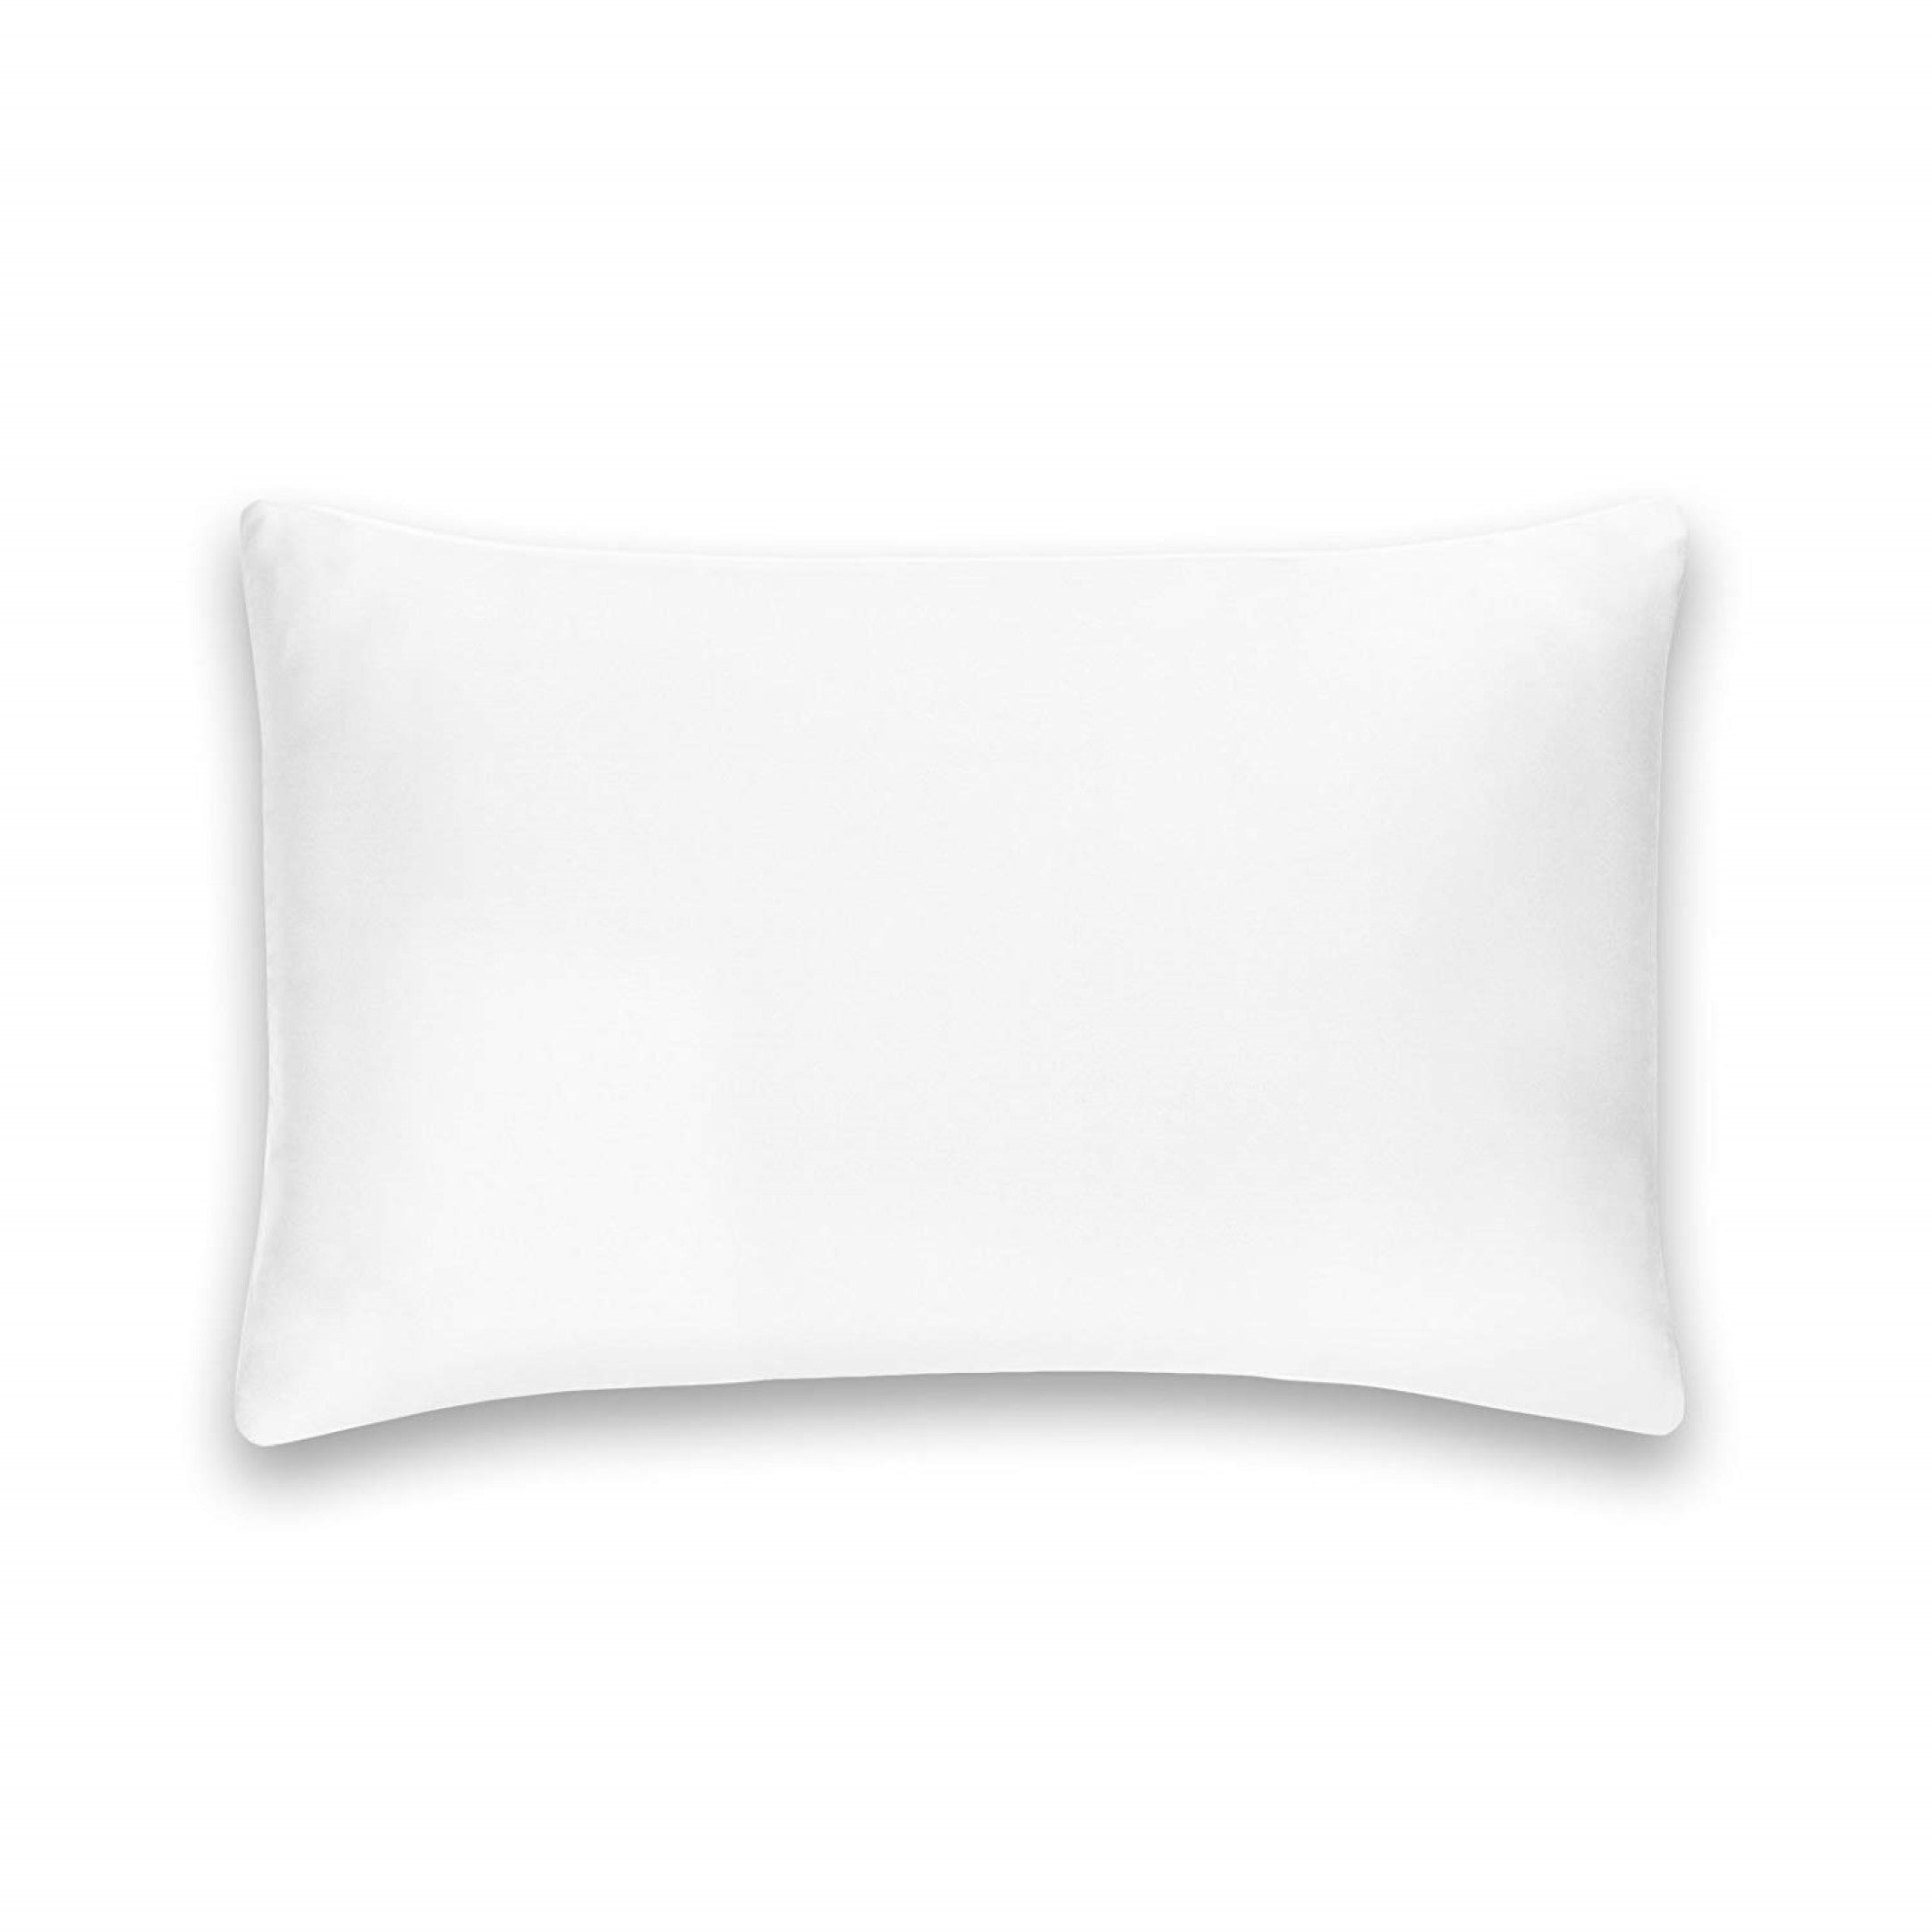 mē Glow Beauty Boosting Pillowcase - For Fine Lines Reduction w/ Anti-Aging Copper Technology